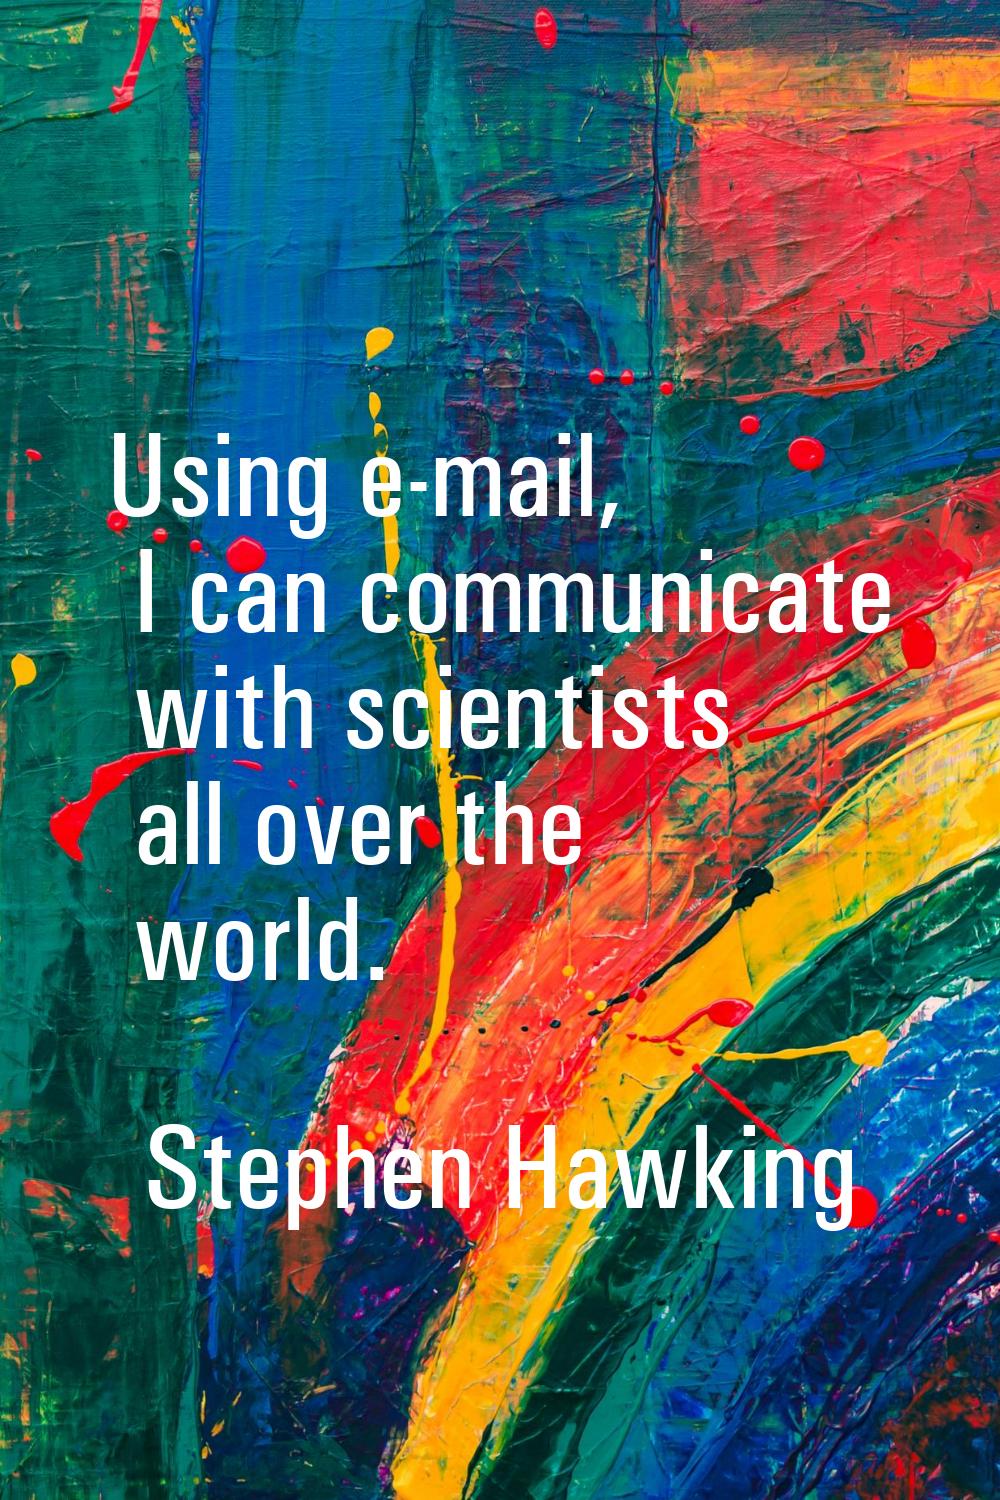 Using e-mail, I can communicate with scientists all over the world.